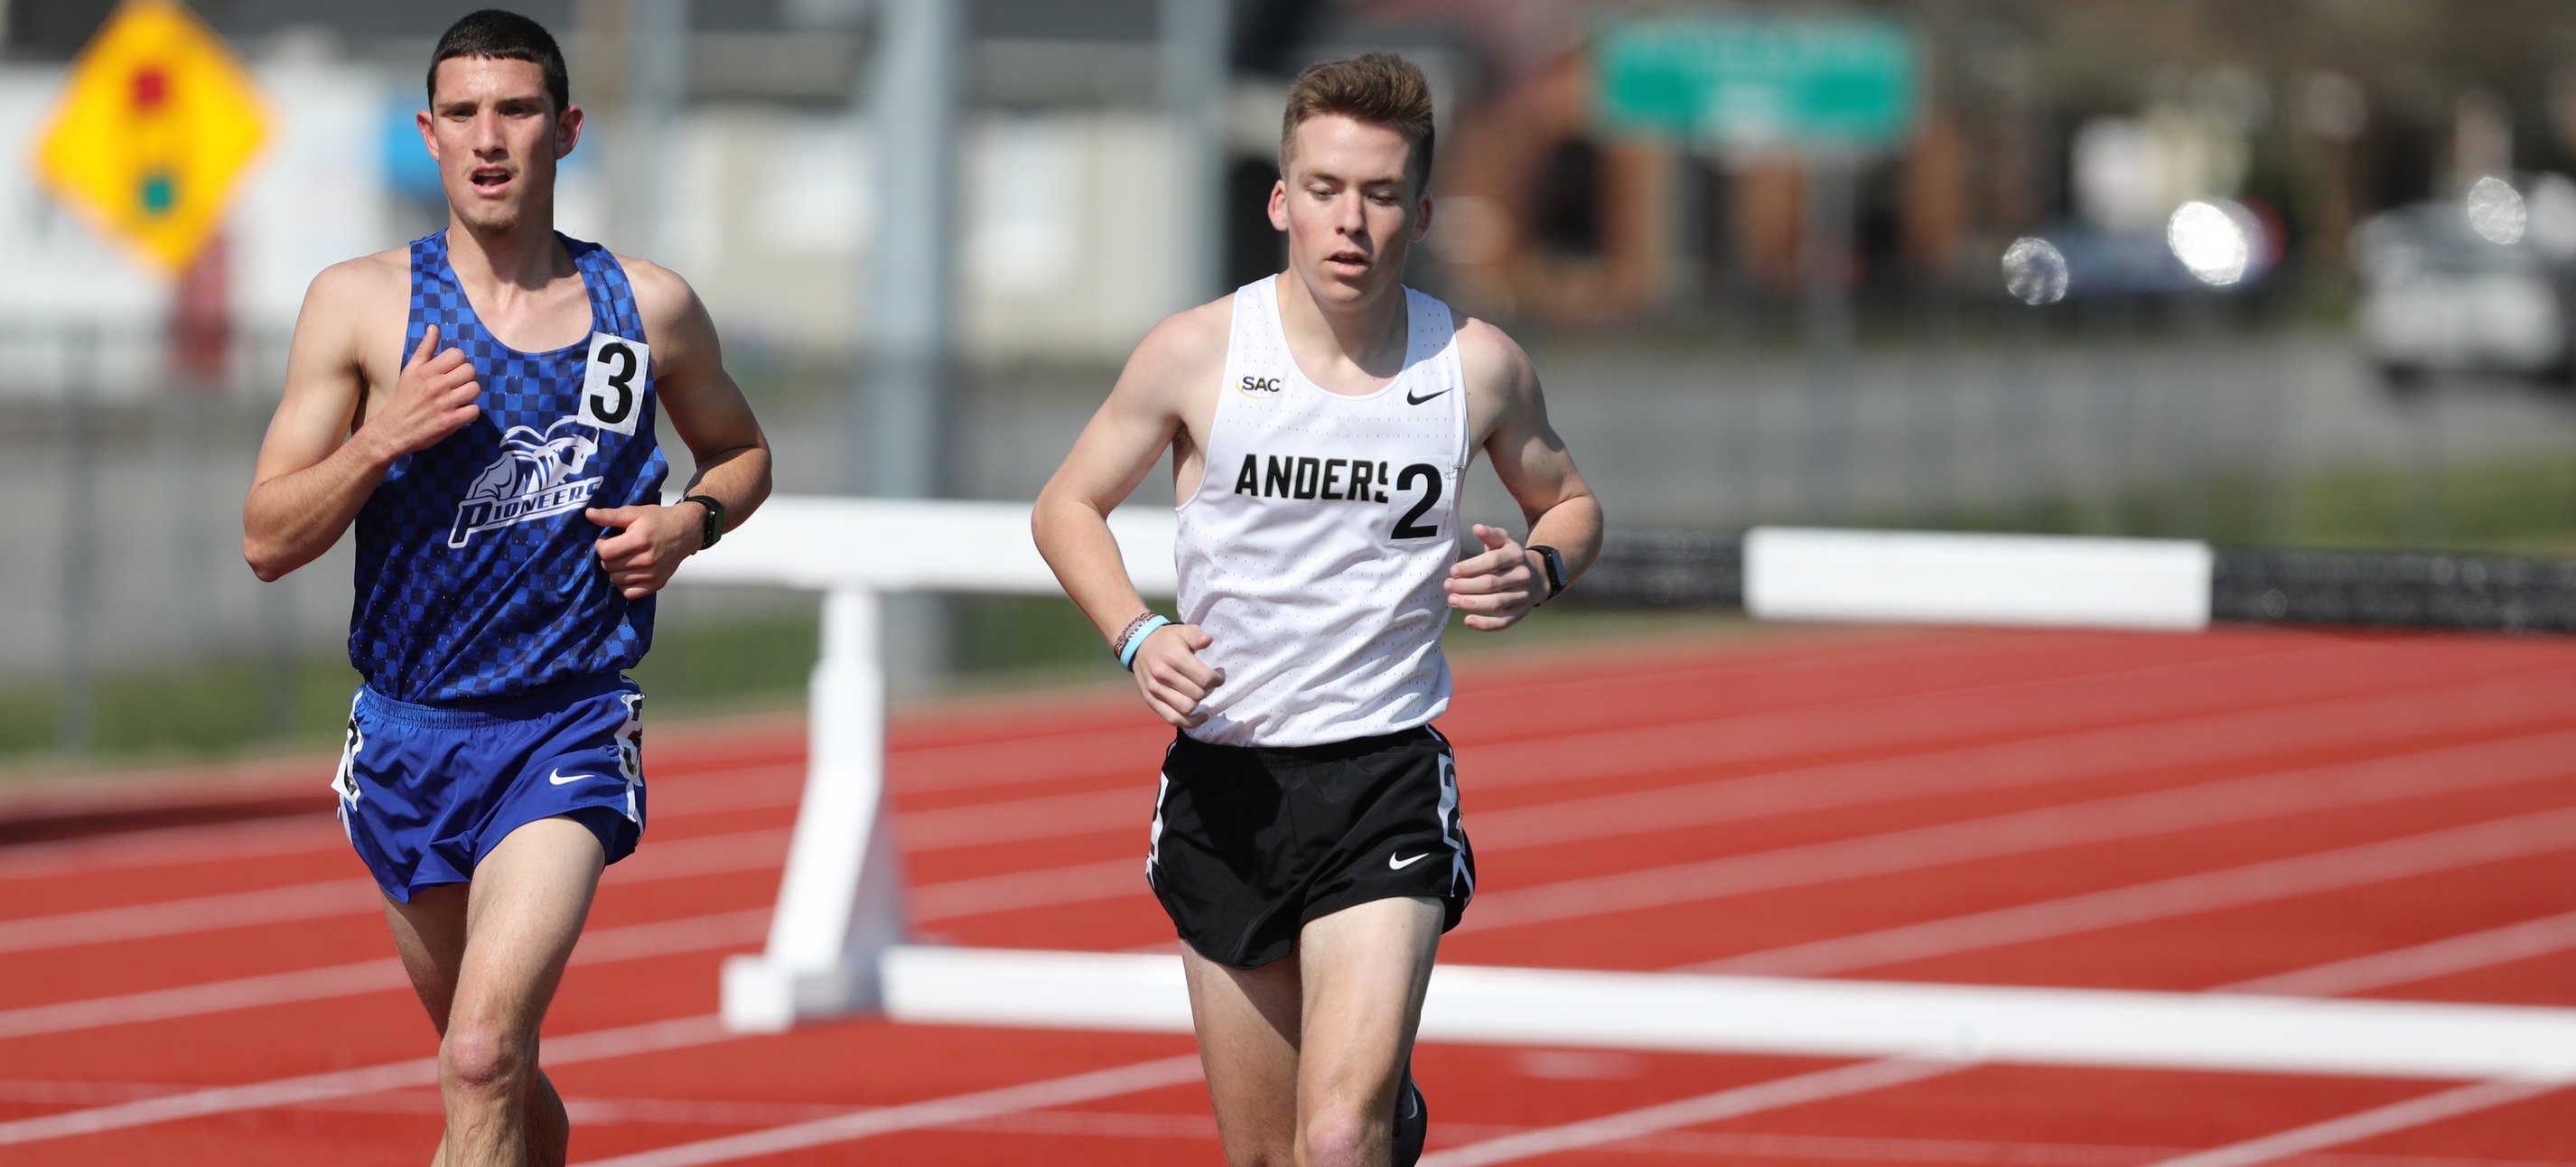 Men's Track and Field Completes Day One of SWU GottaRun Invite